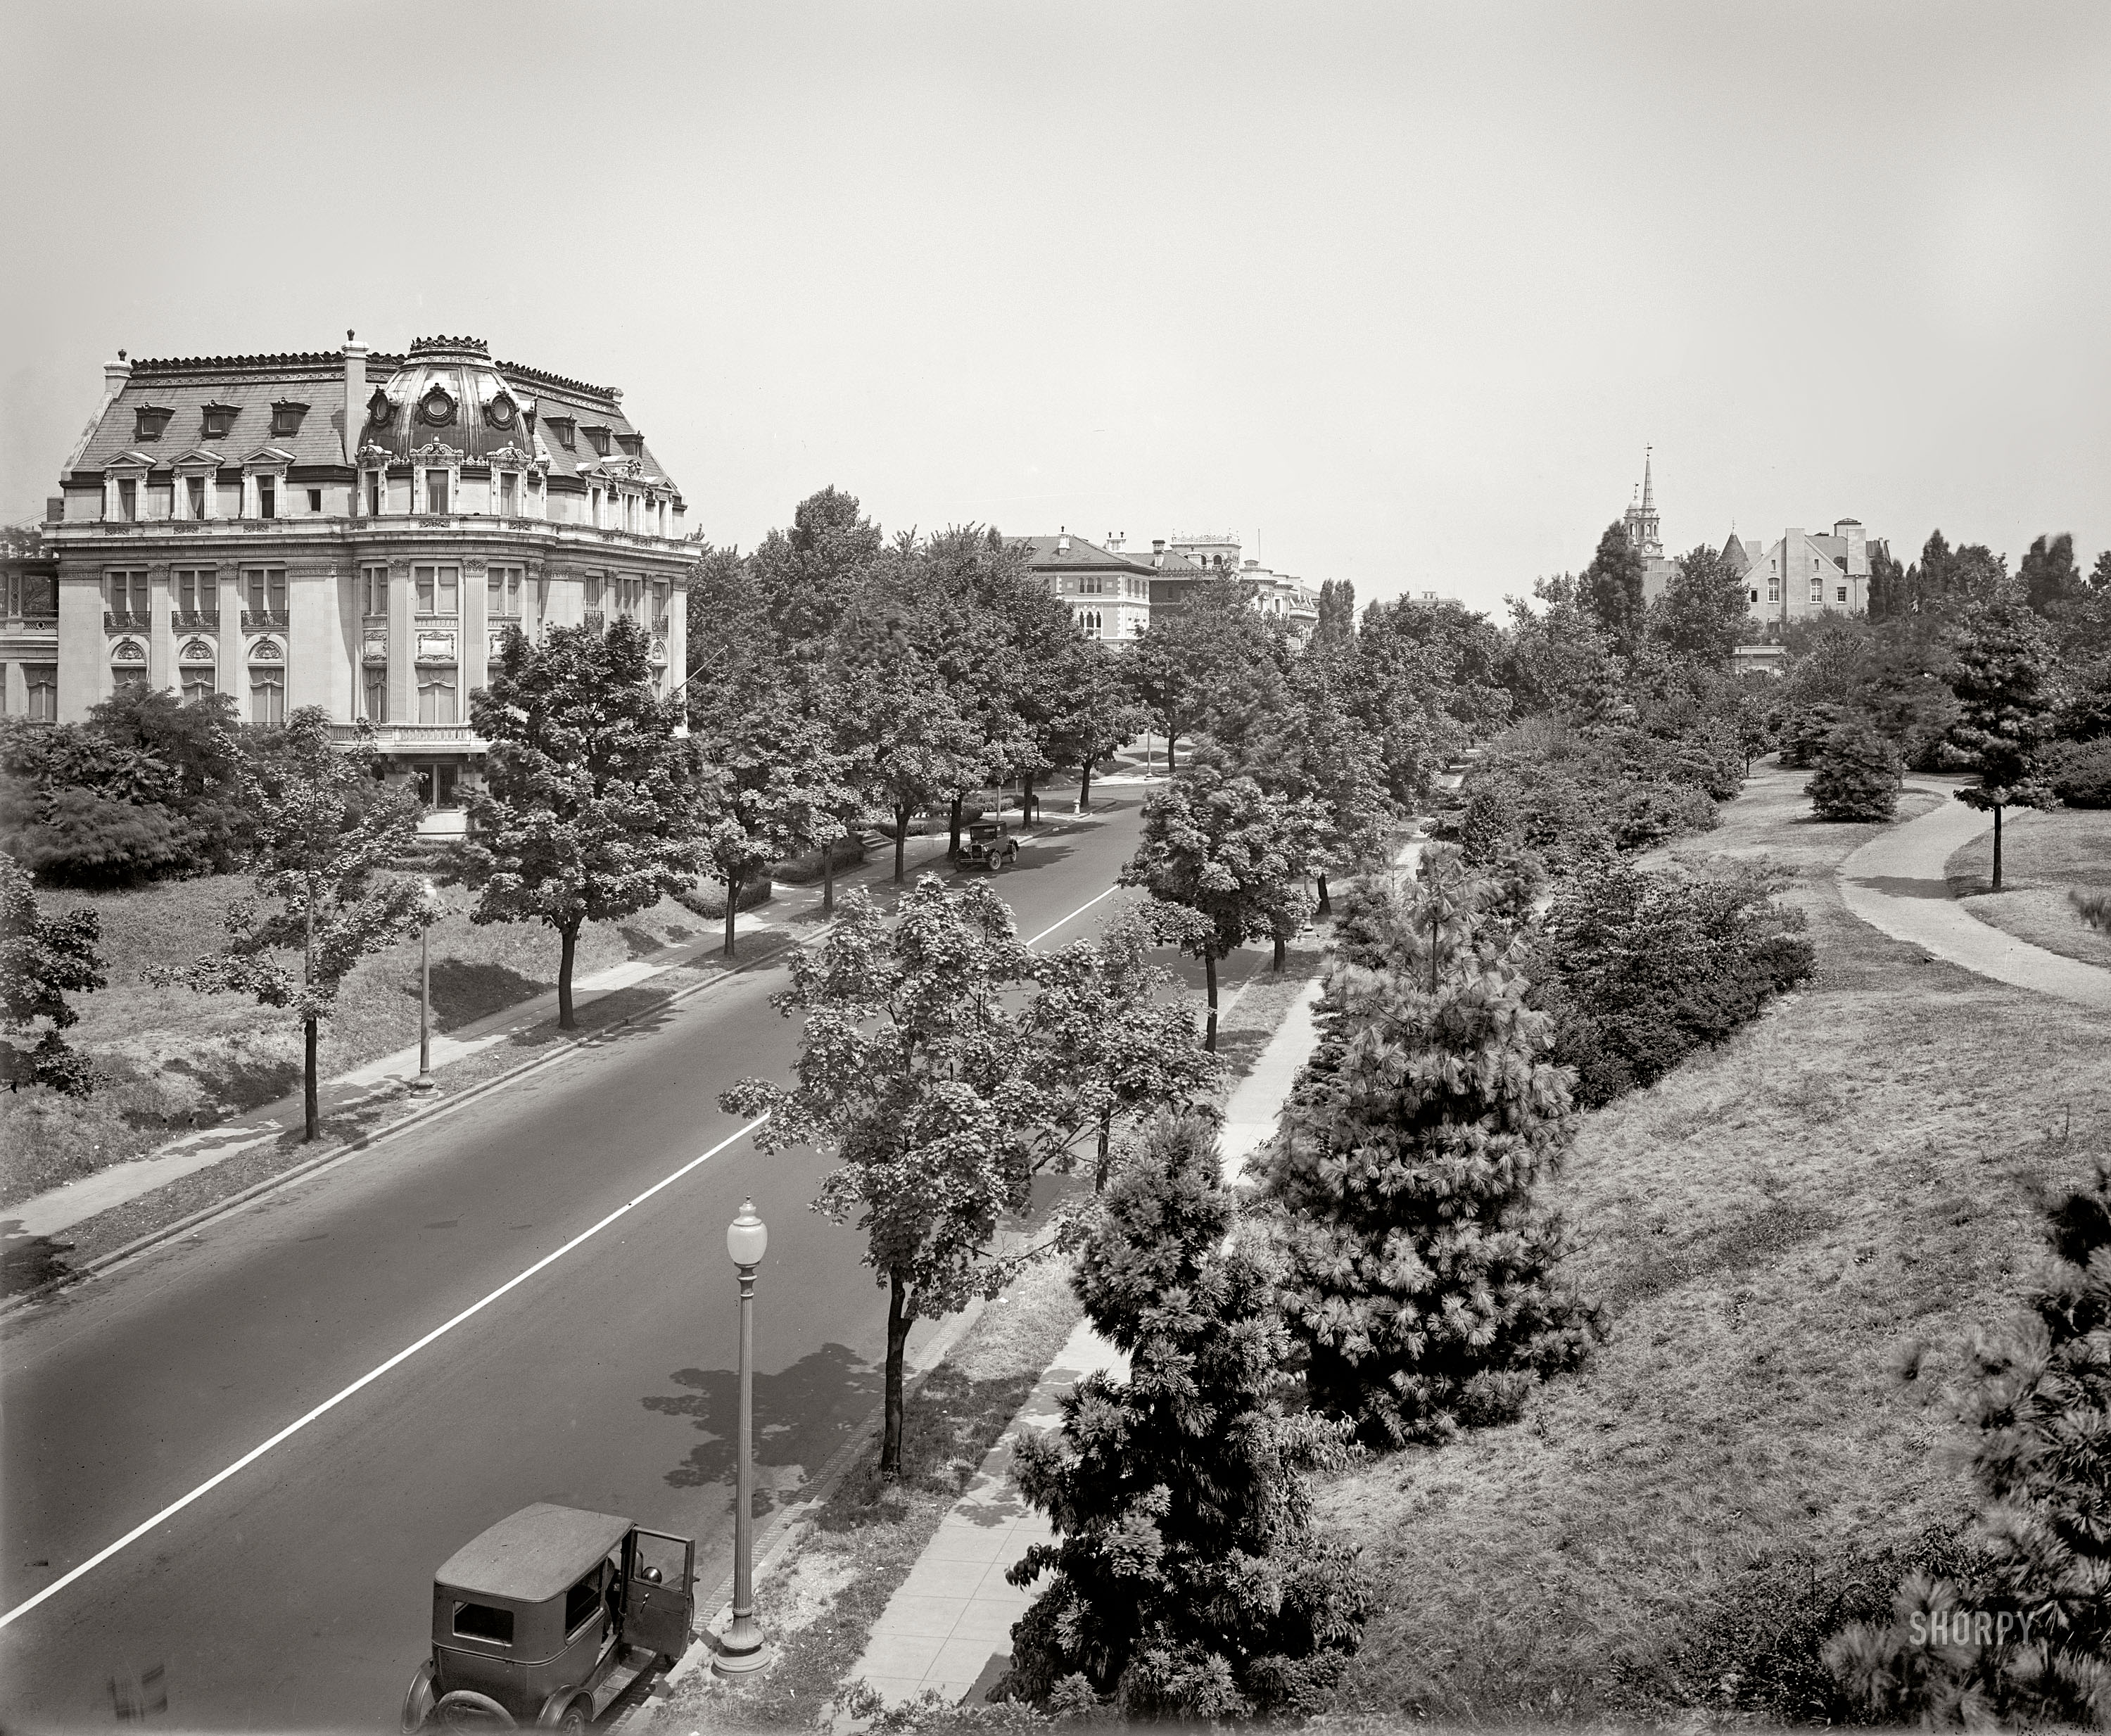 Washington, D.C., circa 1927. The last of three National Photo glass negatives labeled "Jordan & Co." The view is of the French Embassy across from Meridian Hill Park on Sixteenth Street. National Photo Co. Collection. View full size.